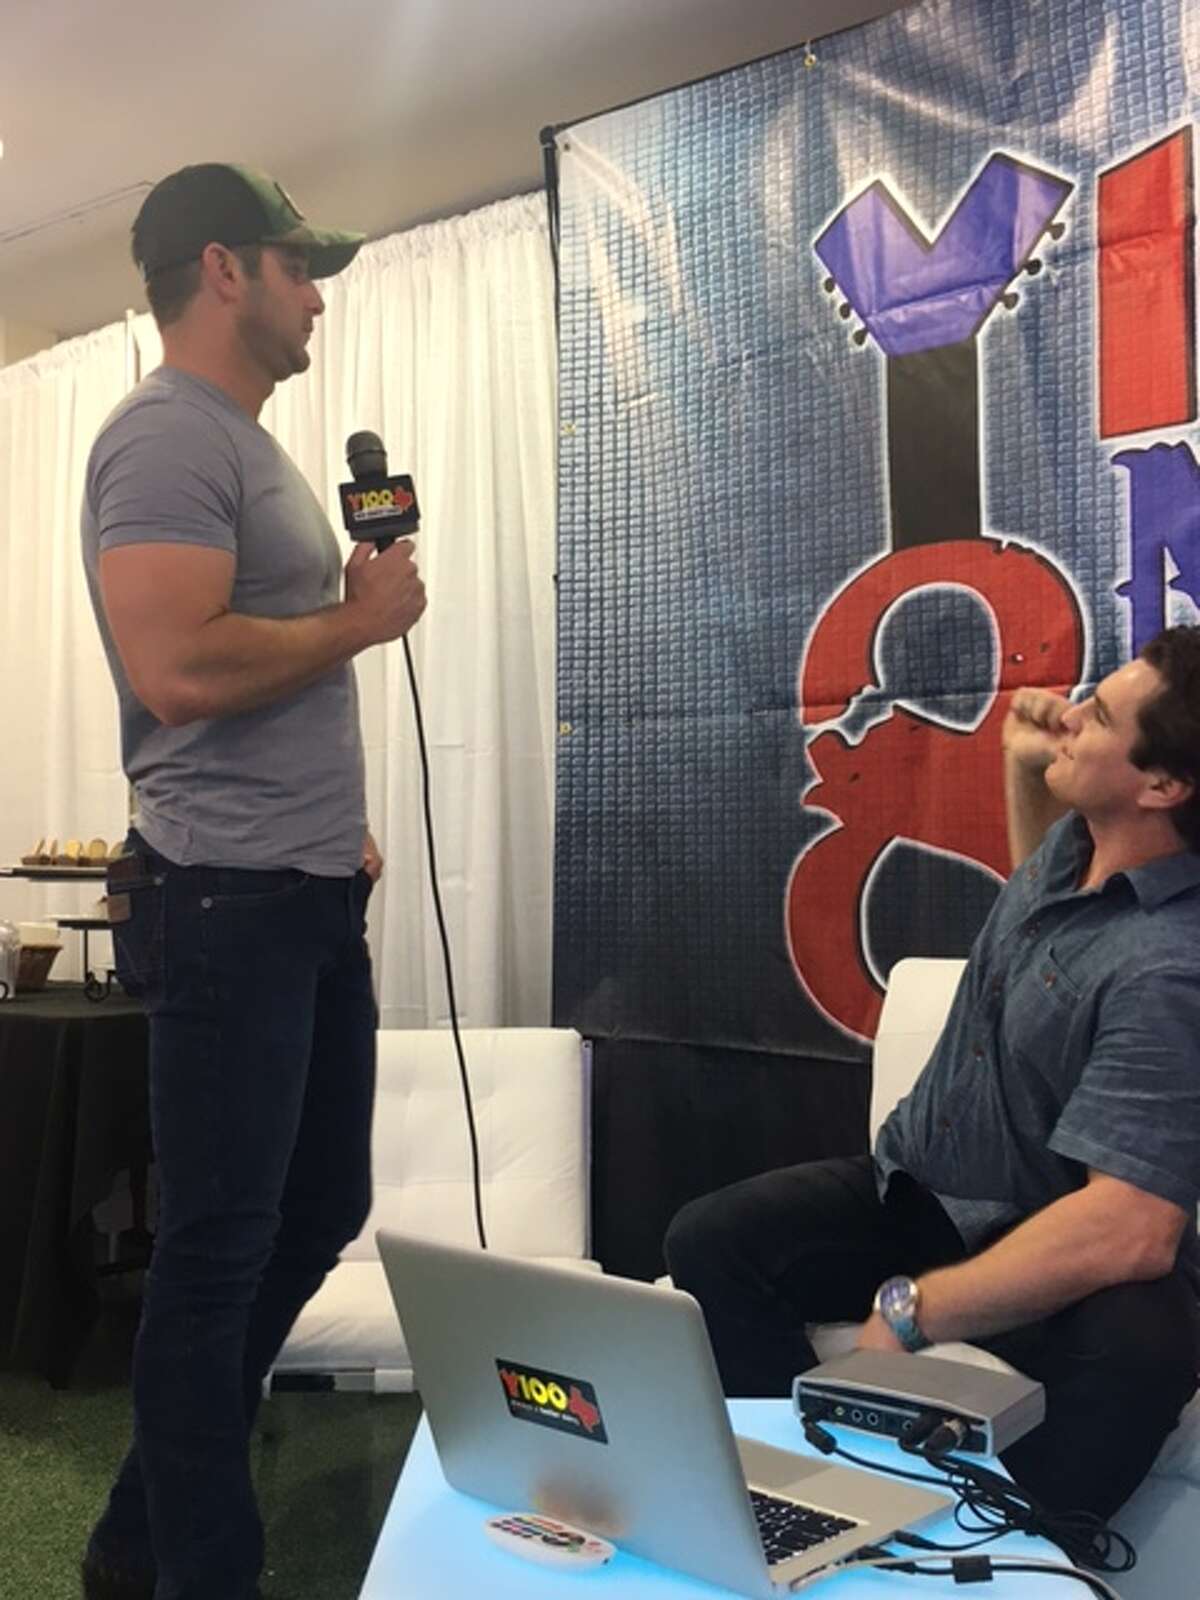 Easton Corbin takes interviews behind the scenes of Y100's annual 8 Man Jam at the Majestic Theatre Nov. 15, 2017.